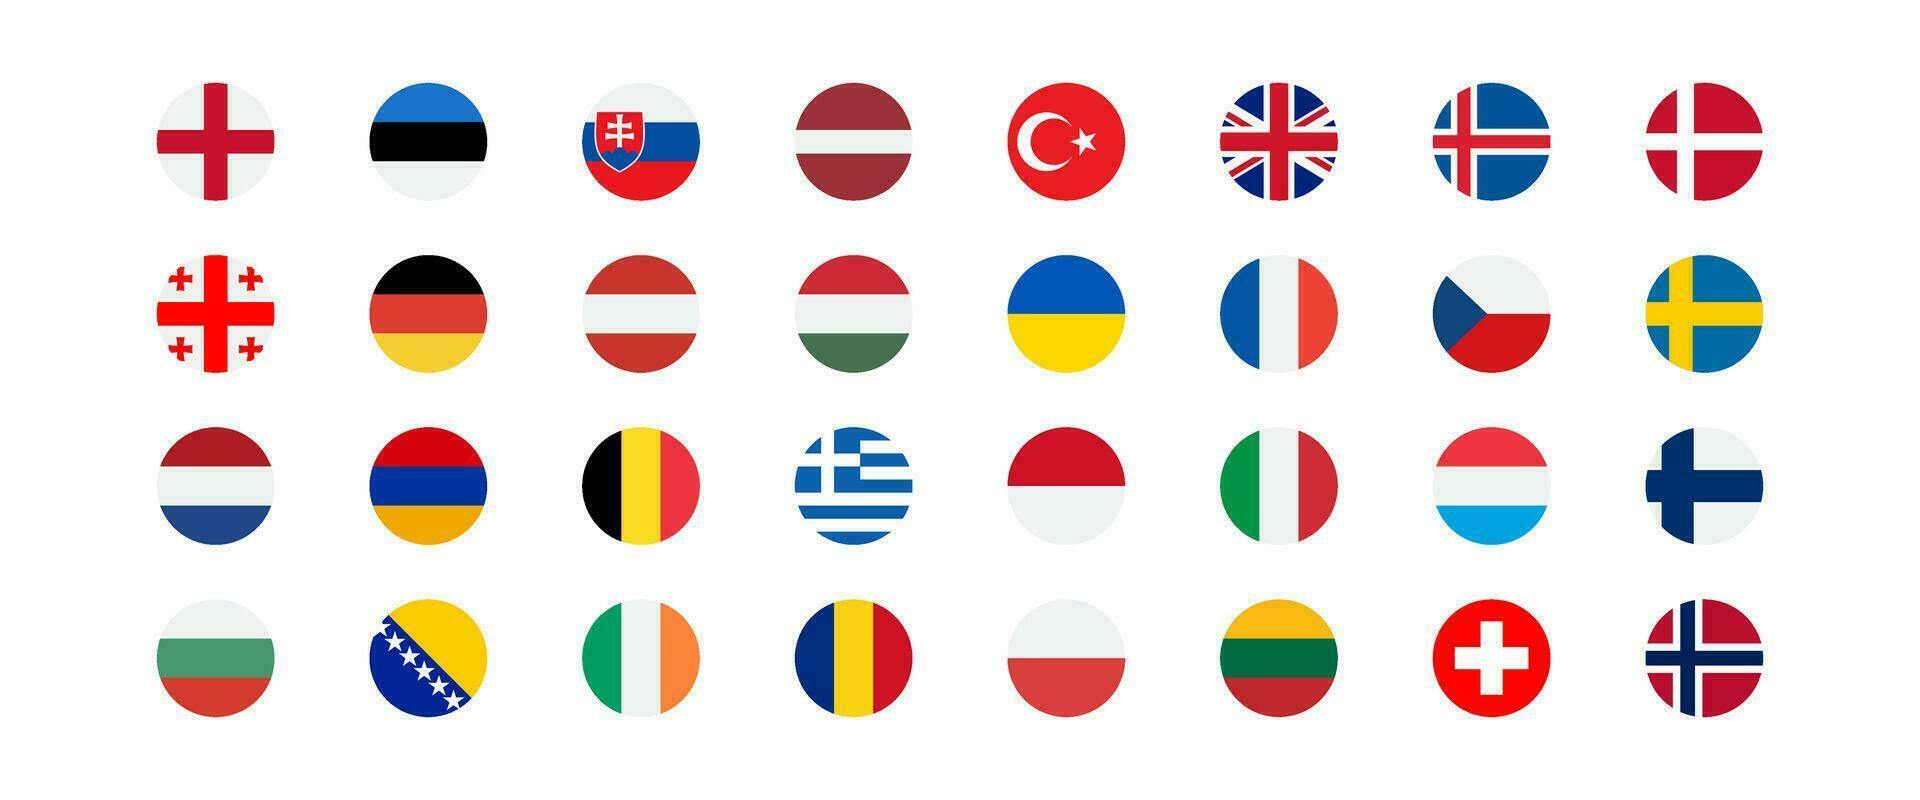 European flags icon. Europe countries set signs. Nation symbol. Banner of France, Germany, Austria, and other symbols. Square form icons. Vector sign.